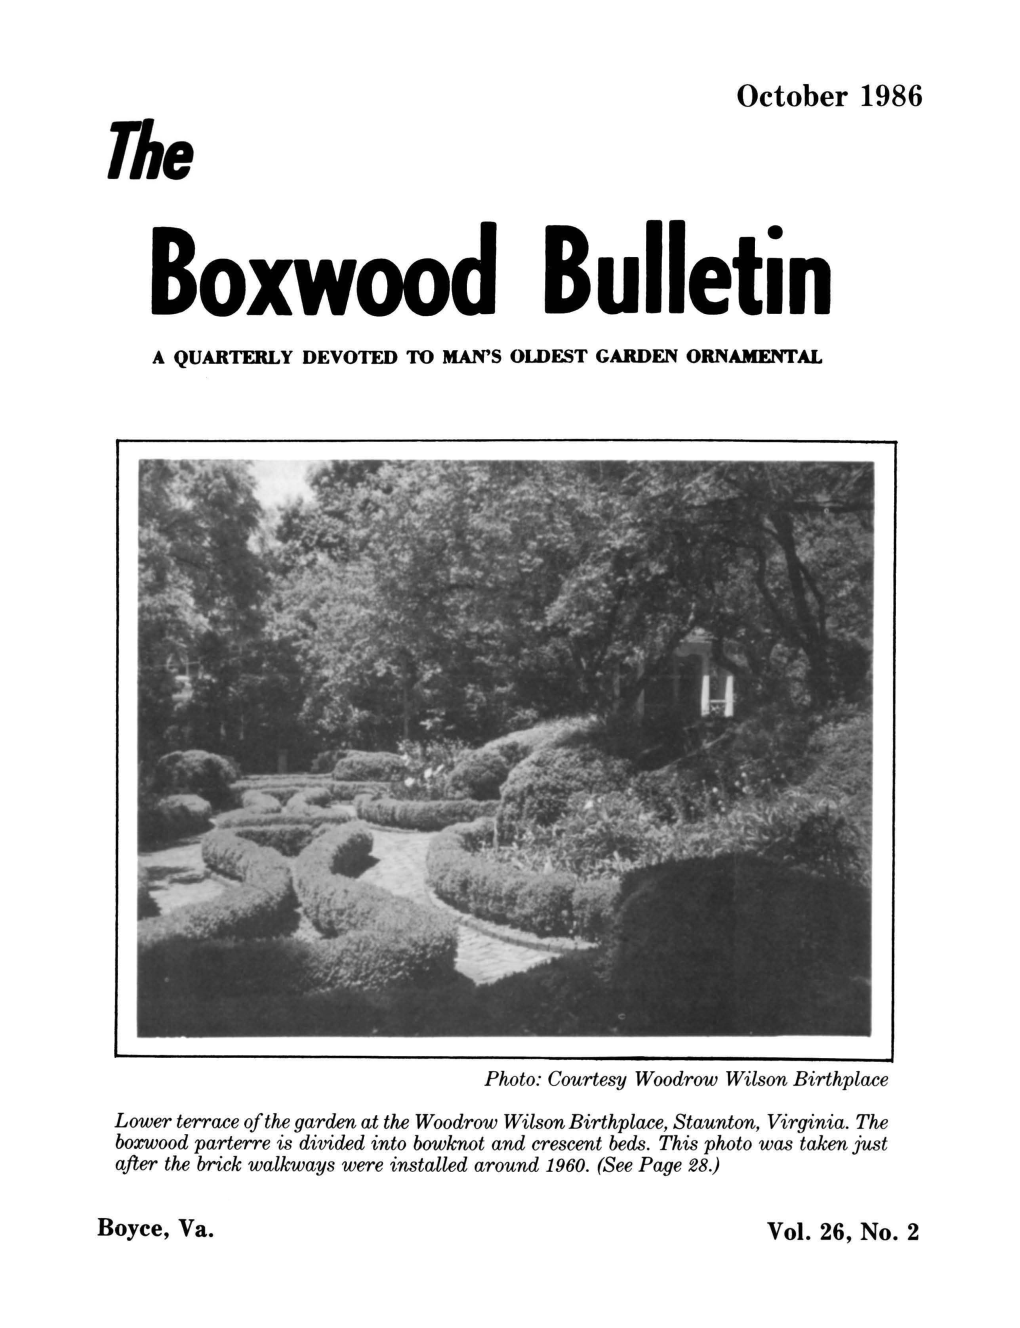 October 1986 the Boxwood Bulletin a QUARTERLY DEVOTED to MAN's OLDEST GARDEN ORNAMENTAL